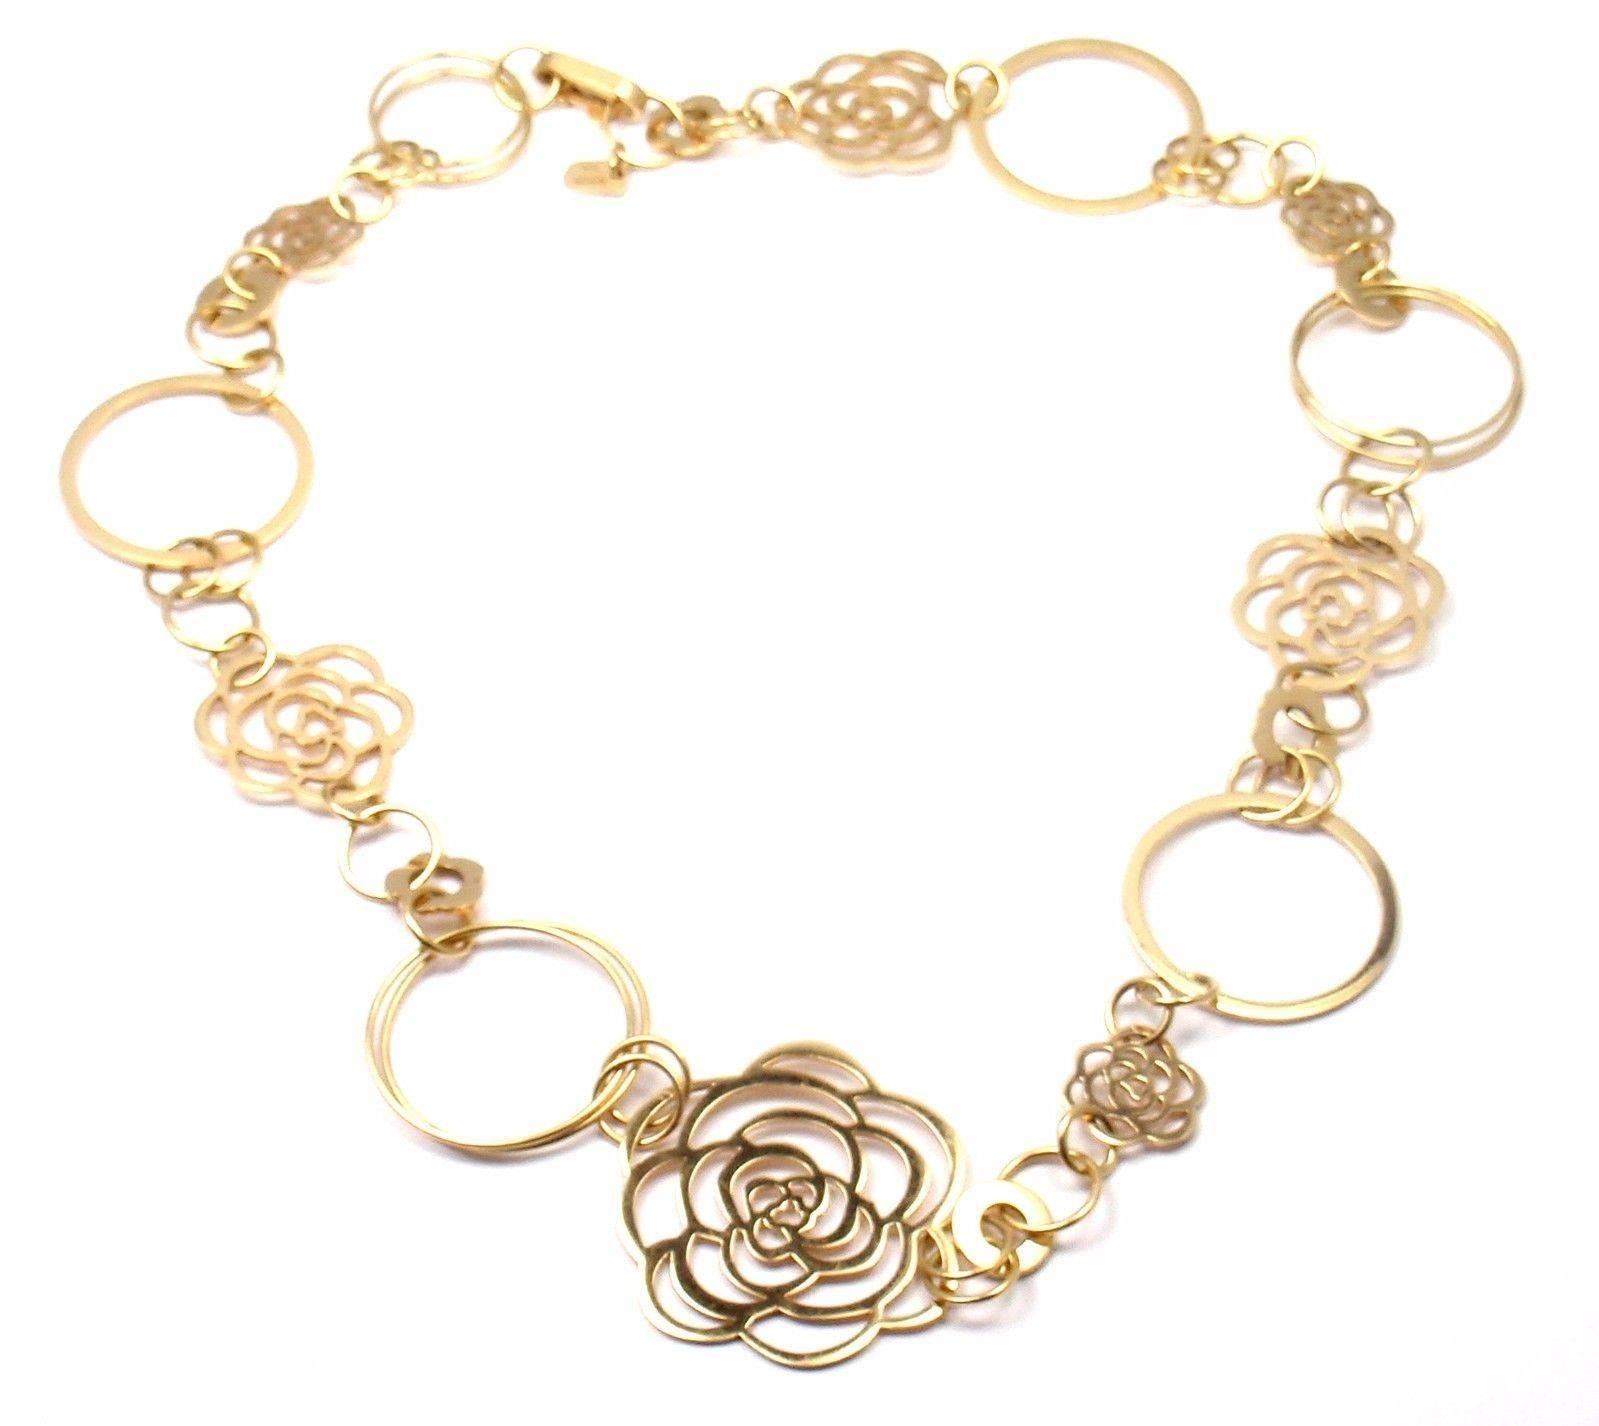 18k Yellow Gold Camelia Camellia Flower Link Necklace by Chanel.   
Details:  
Length: 20